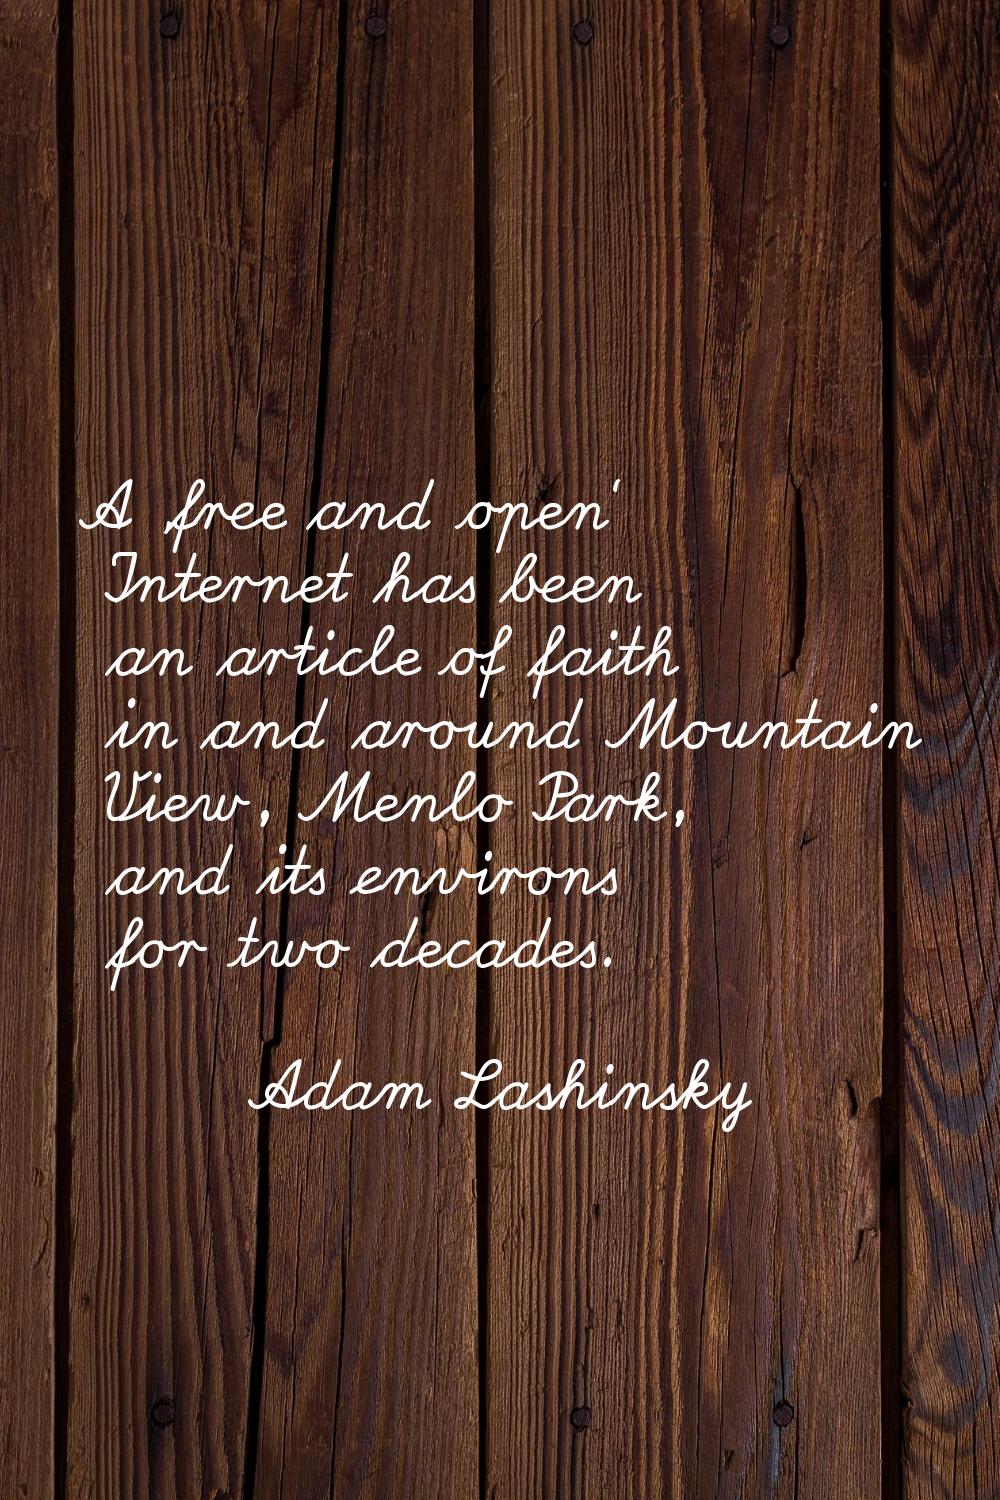 A 'free and open' Internet has been an article of faith in and around Mountain View, Menlo Park, an